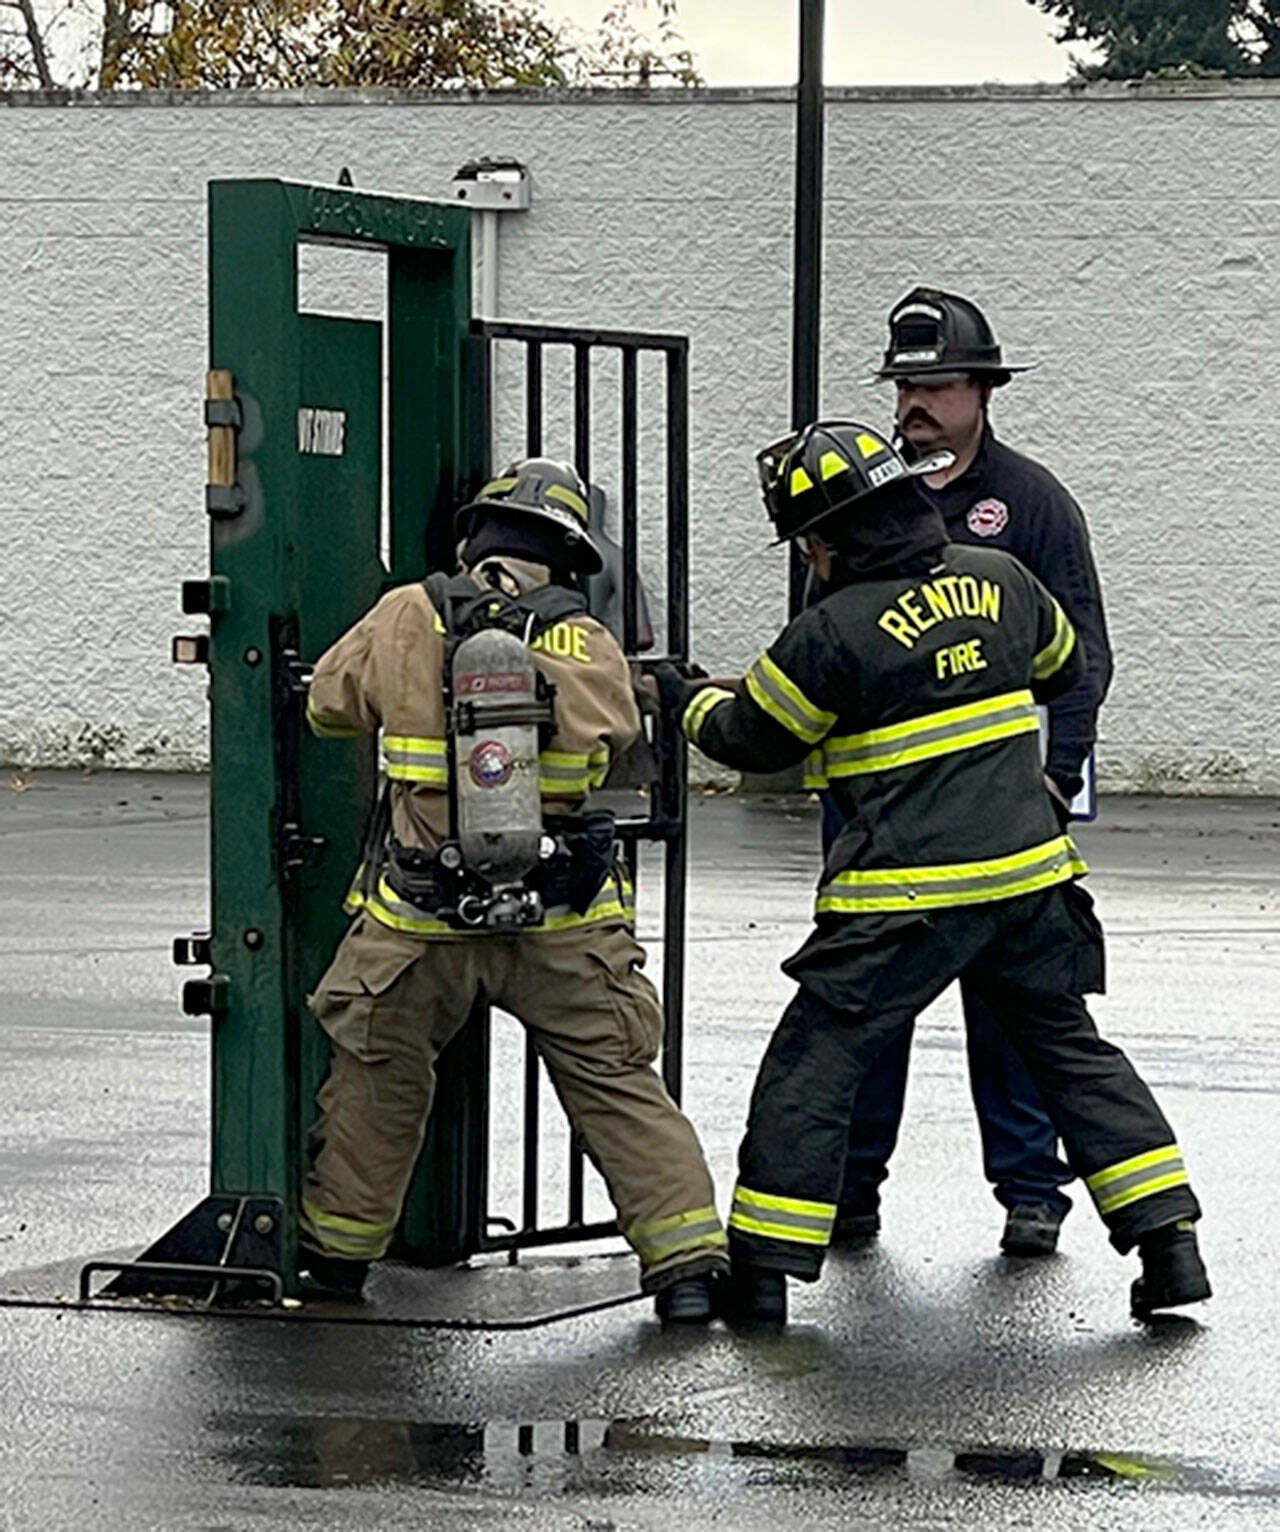 Recruit firefighters are taught how to force entry through a door. COURTESY PHOTO, Puget Sound Fire